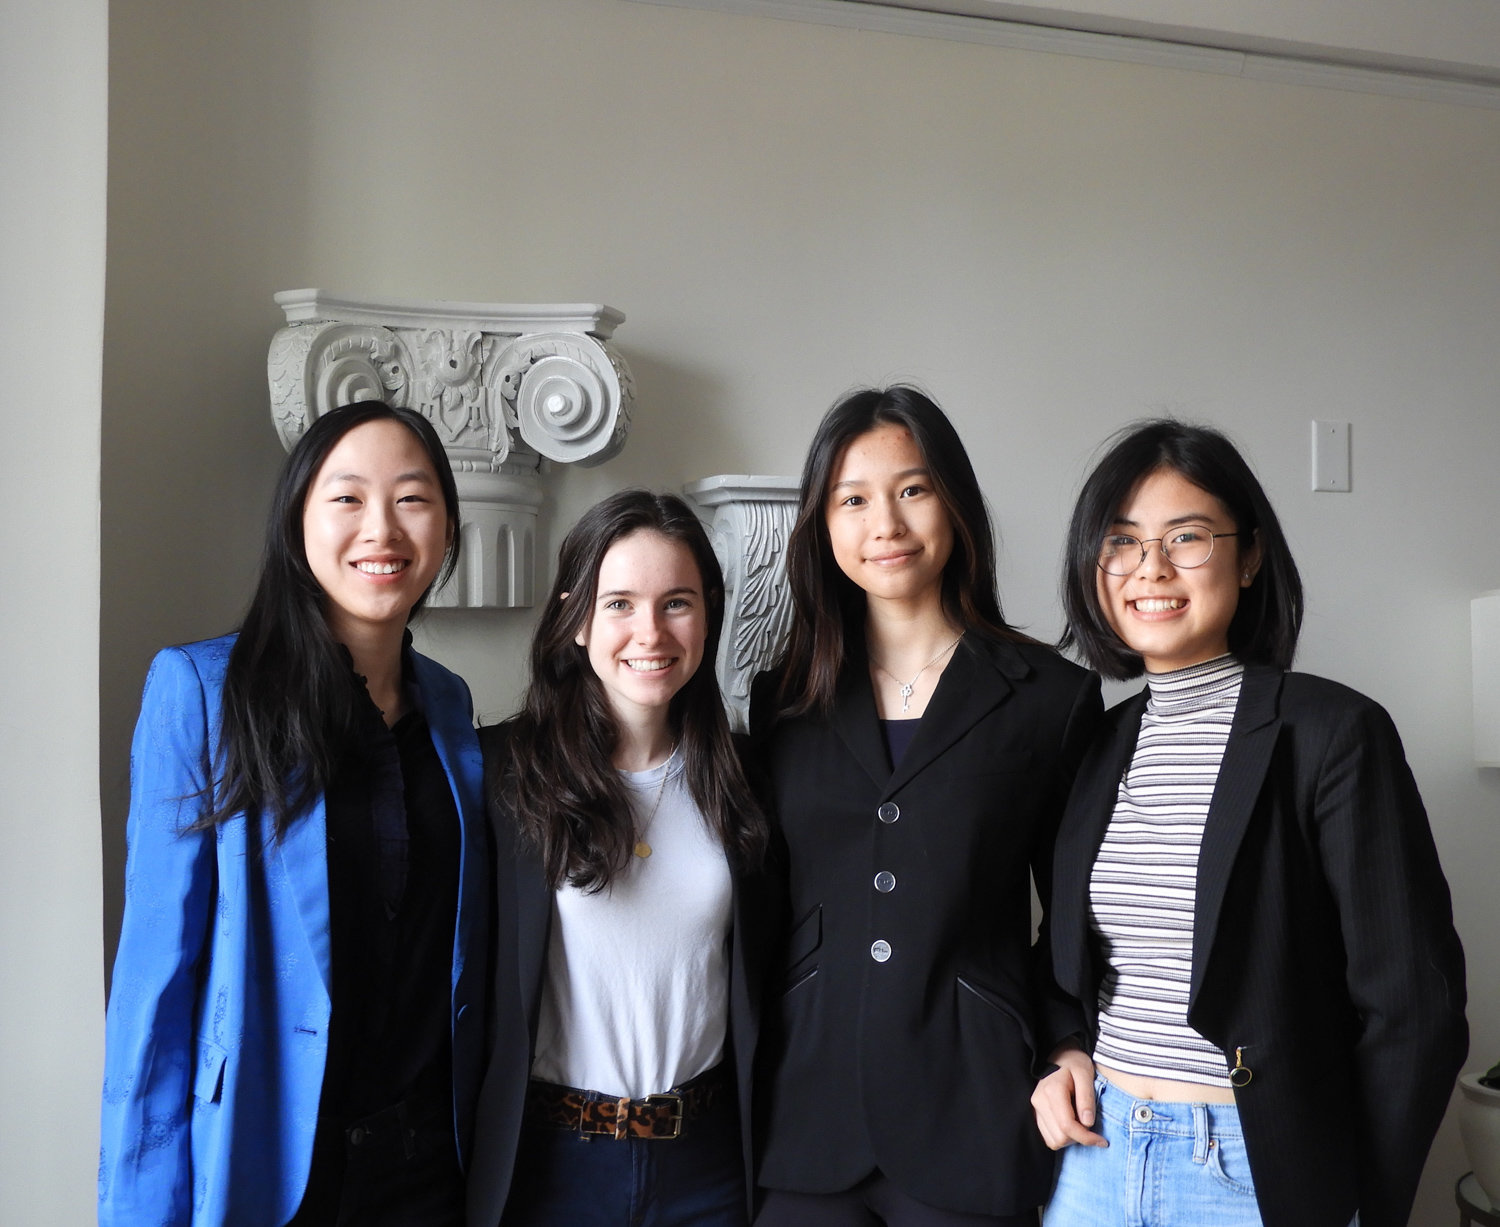 Ethical Culture Fieldston School students Rosemary Jiang, left, Olivia Pollack, Vivian Lee and Natalie Chen want to teach women about financial literacy. They’re the founding members of the school’s Females in Finance Club.